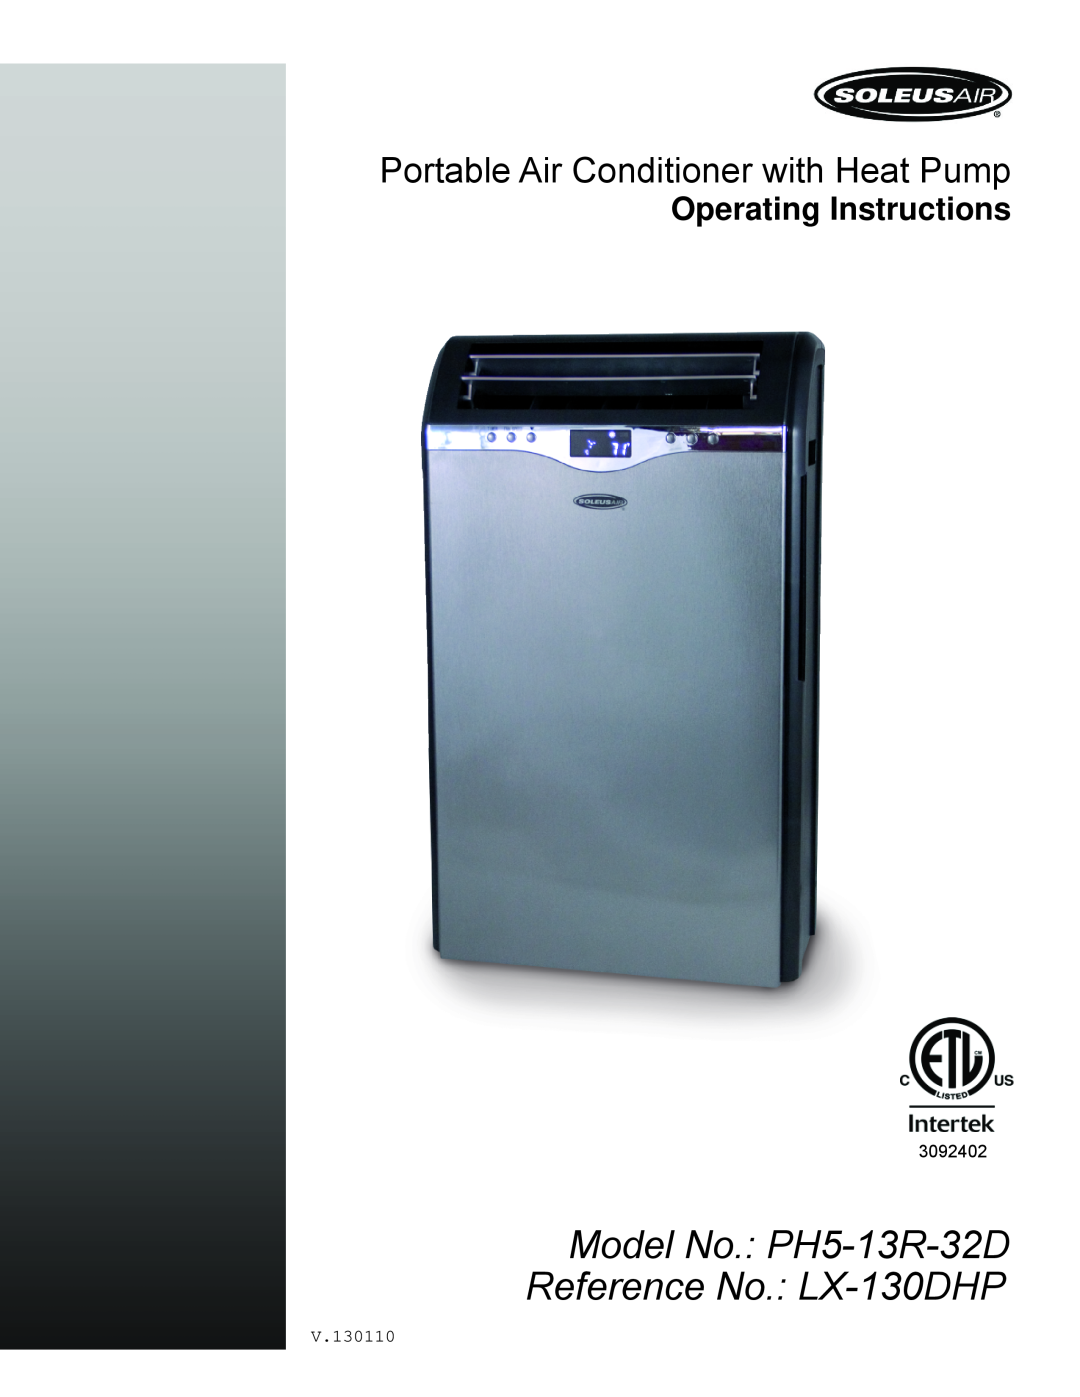 Soleus Air manual Model No. PH5-13R-32D Reference No. LX-130DHP, Portable Air Conditioner with Heat Pump, 3092402 